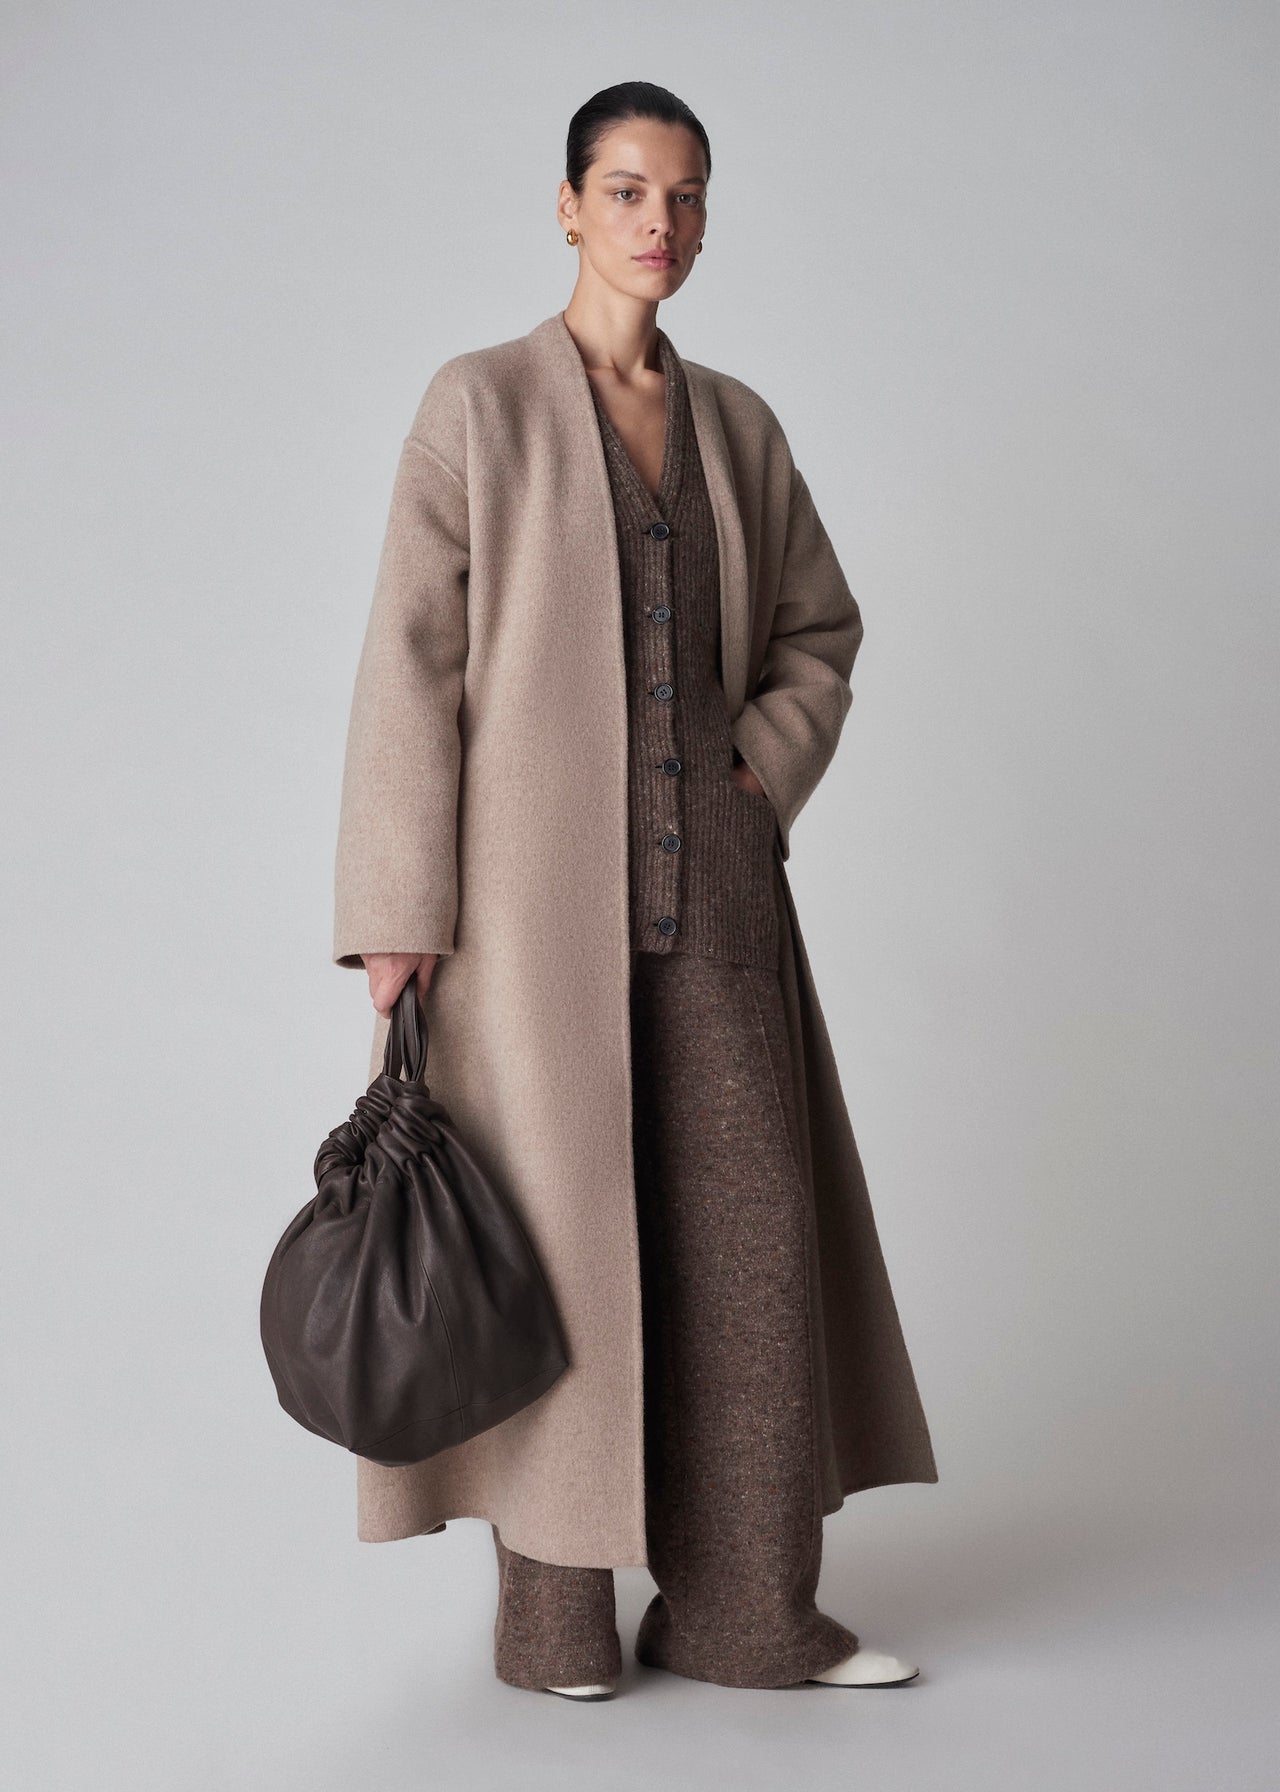 Wrap Coat in Double Faced Wool Cashmere - Taupe - CO